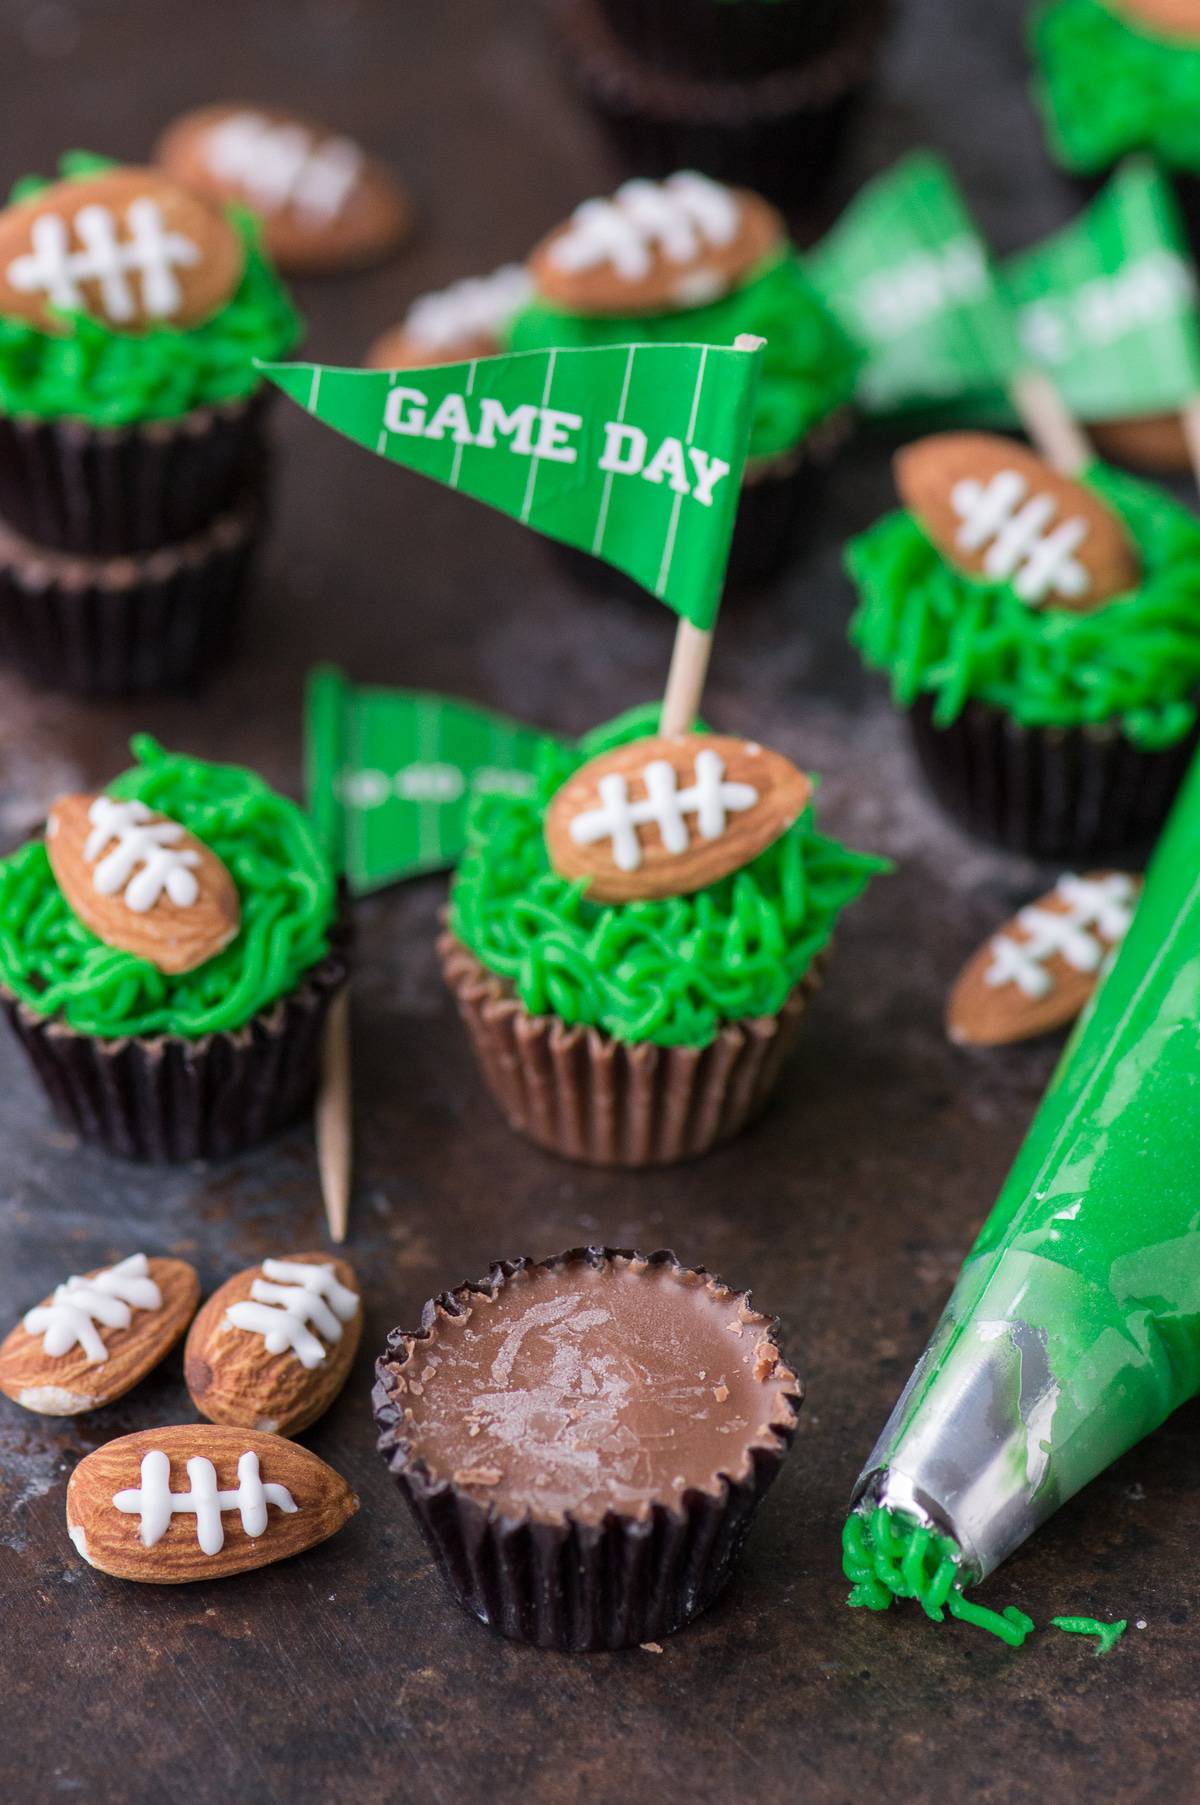 These reese’s peanut butter football cups are the easiest game treat! You need peanut butter cups, green frosting and football almonds!